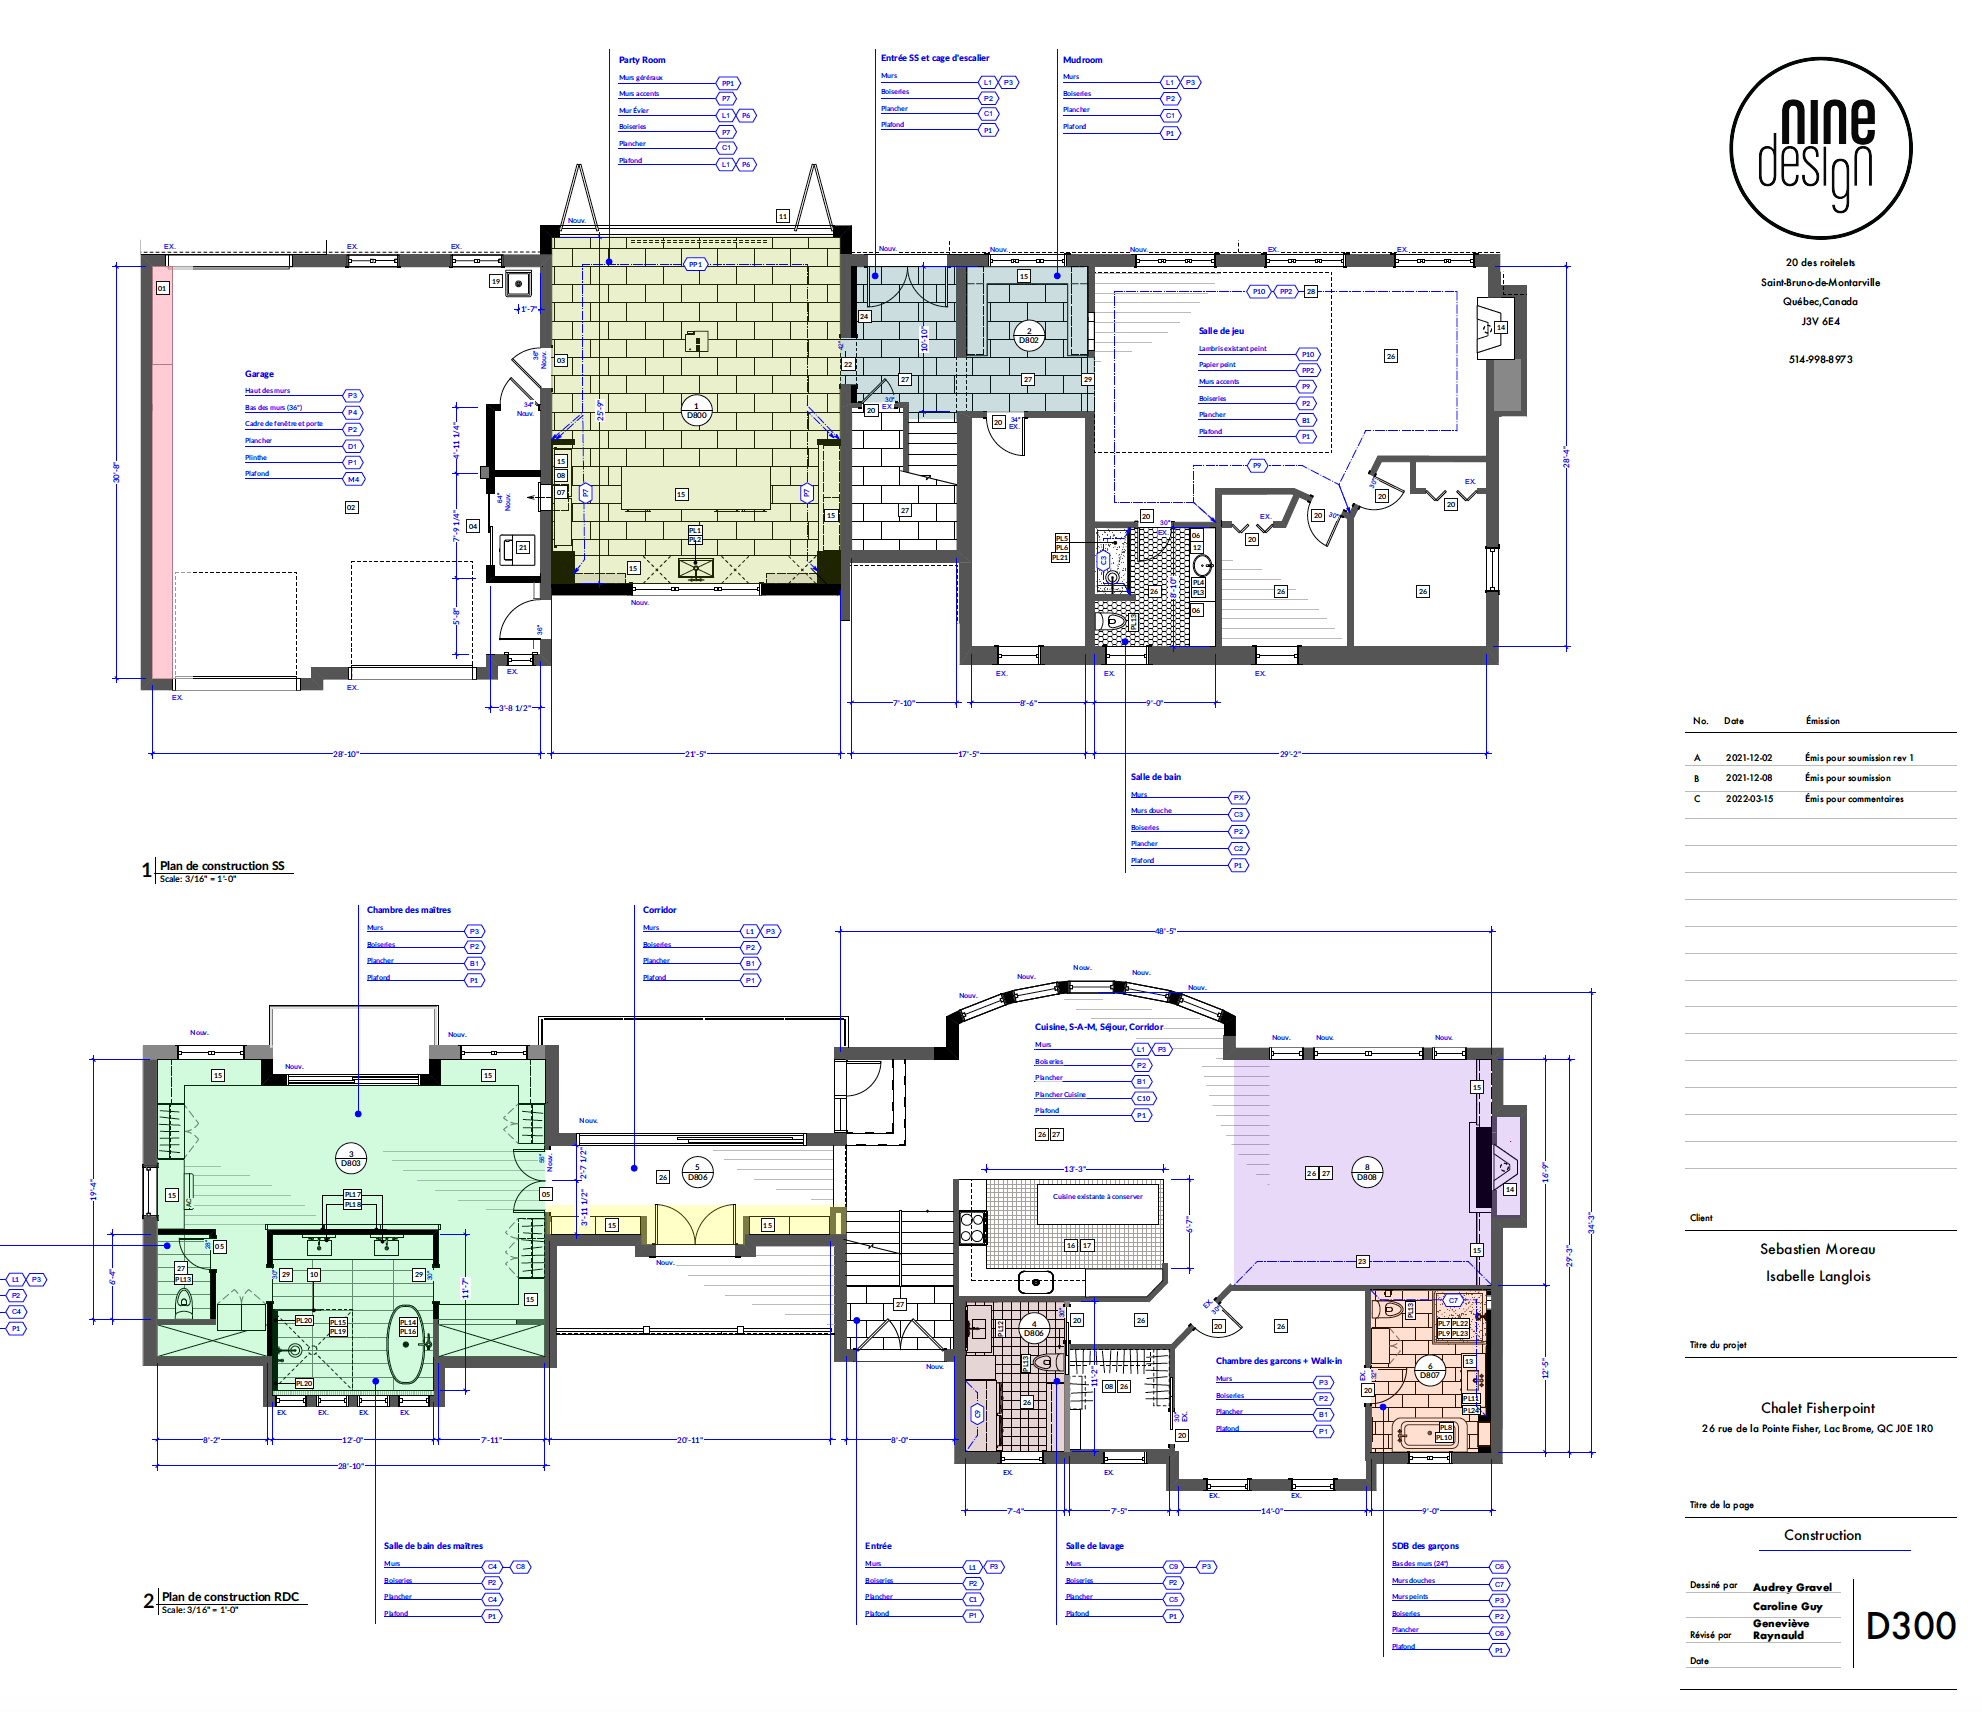 A Long-time Vectorworks Designer’s Switch to BIM for Interiors